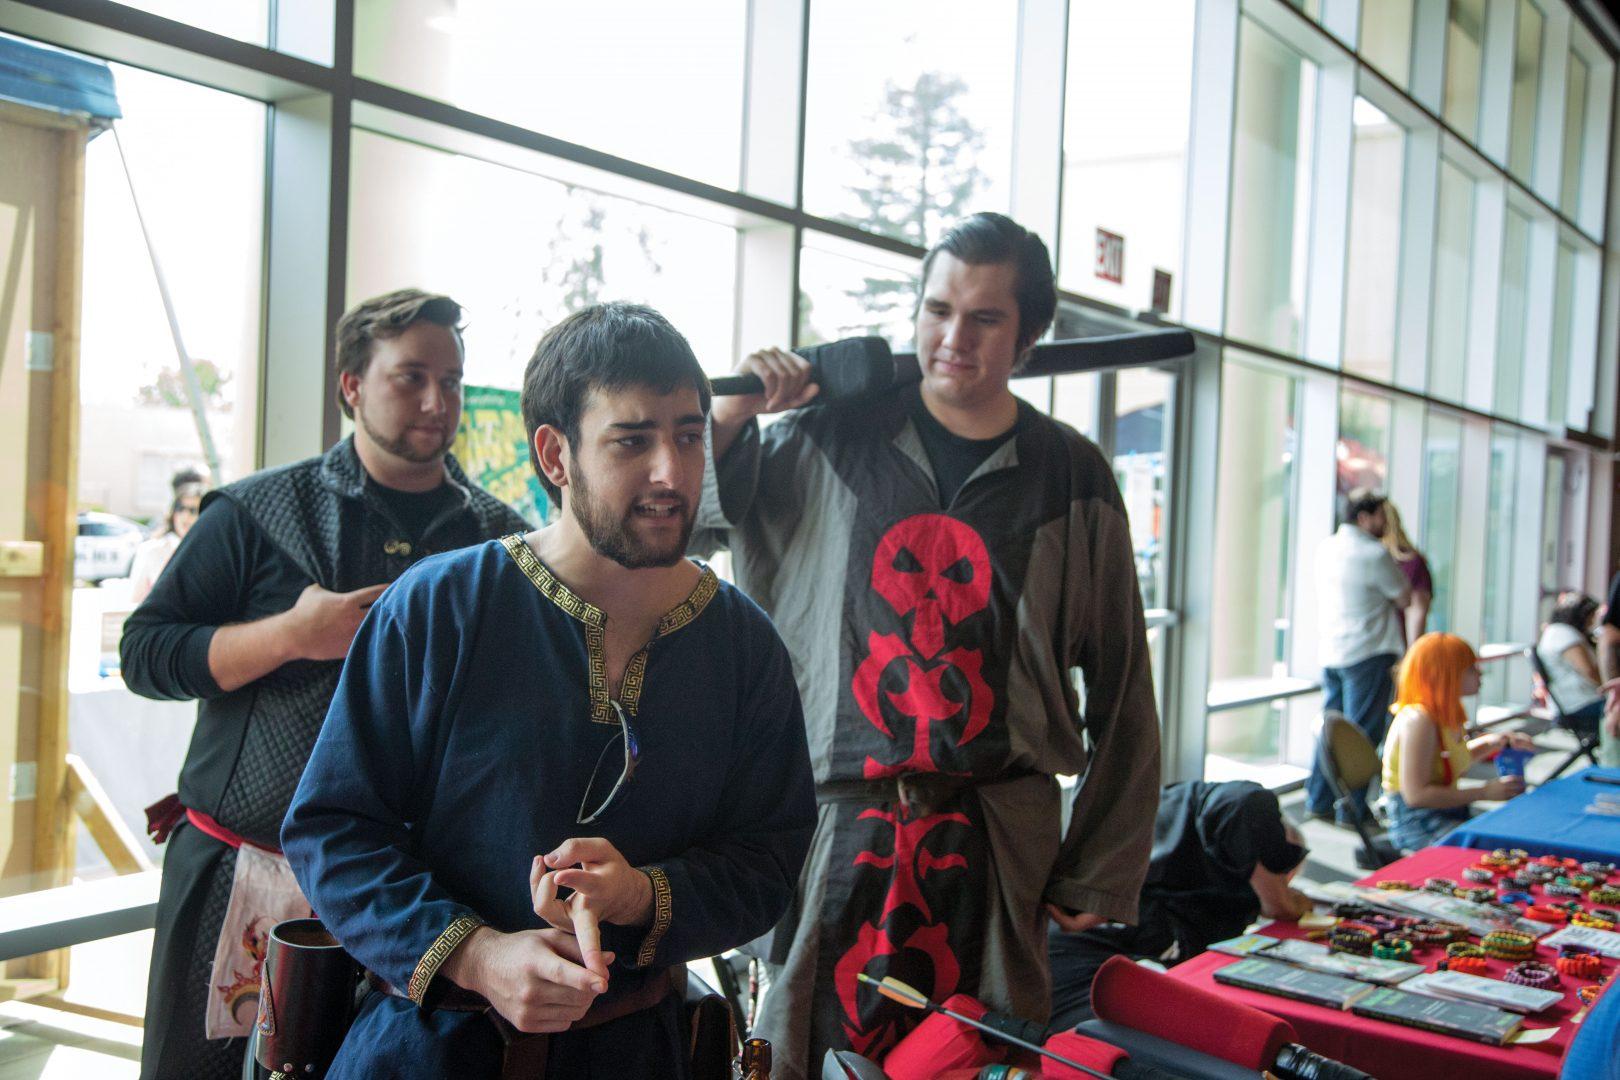 Fresno State’s inaugural comic convention featured panel discussions, costume contests, gaming tournaments over the course of Saturday and Sunday. 
